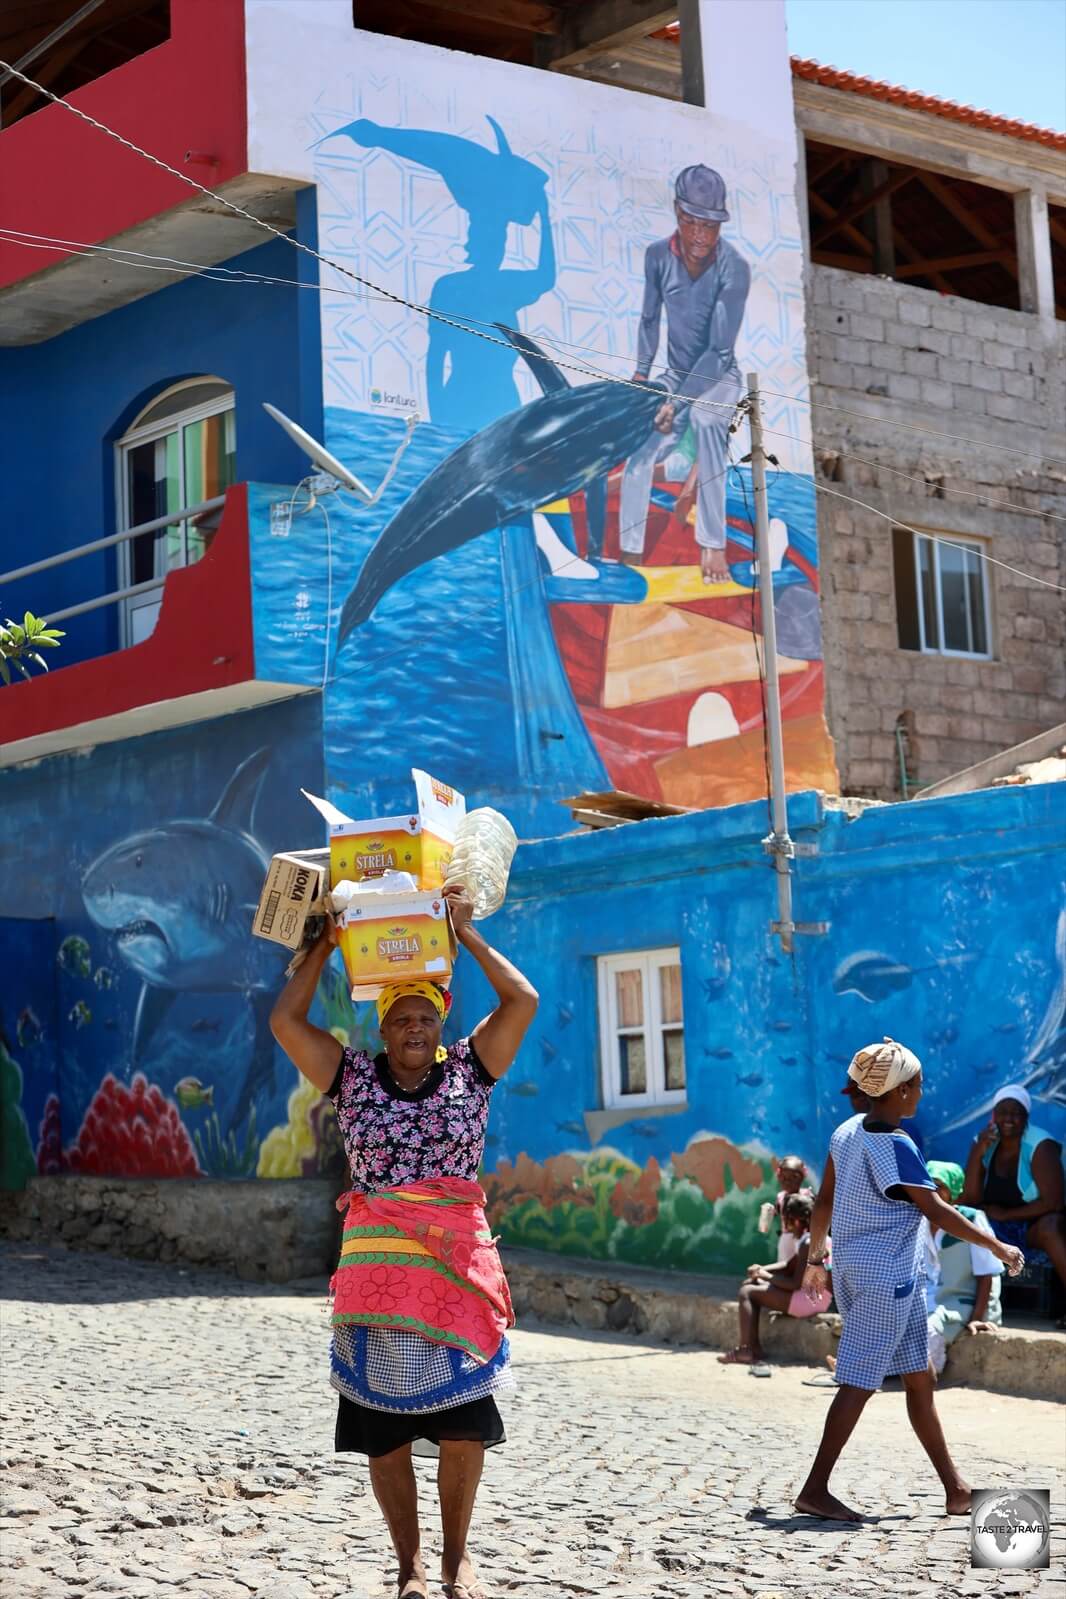 Beautiful images of aquatic life can be seen painted on the facades of houses in Porto Mosquito.